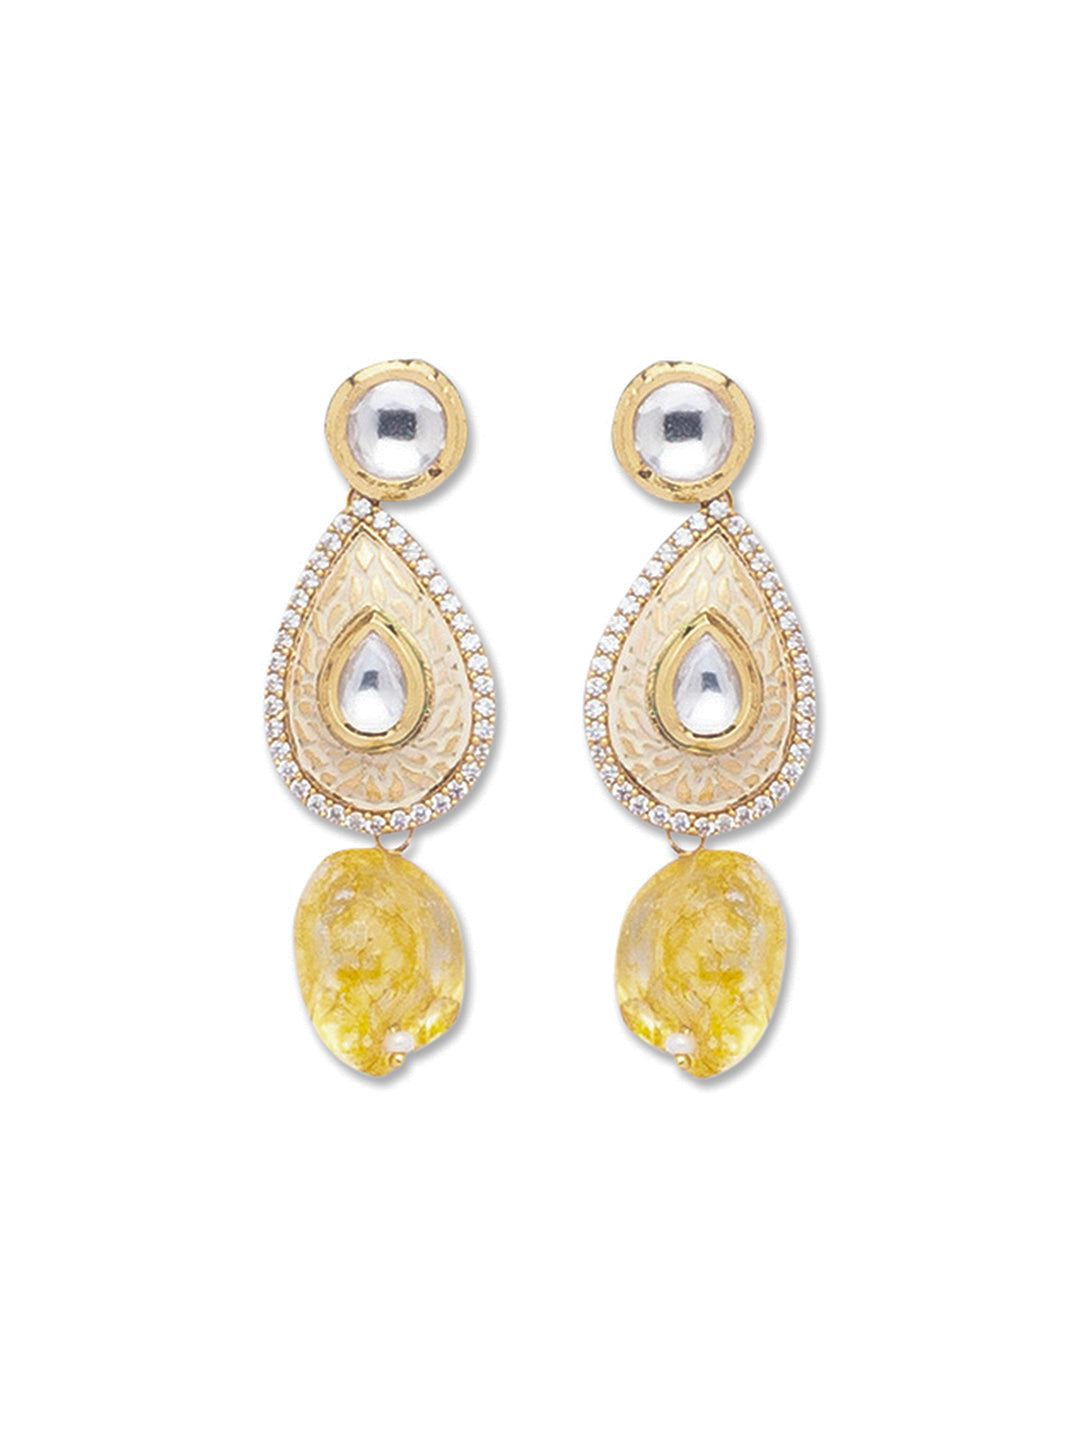 Golden, Crème and Yellow  Kundan Earrings with Onyx